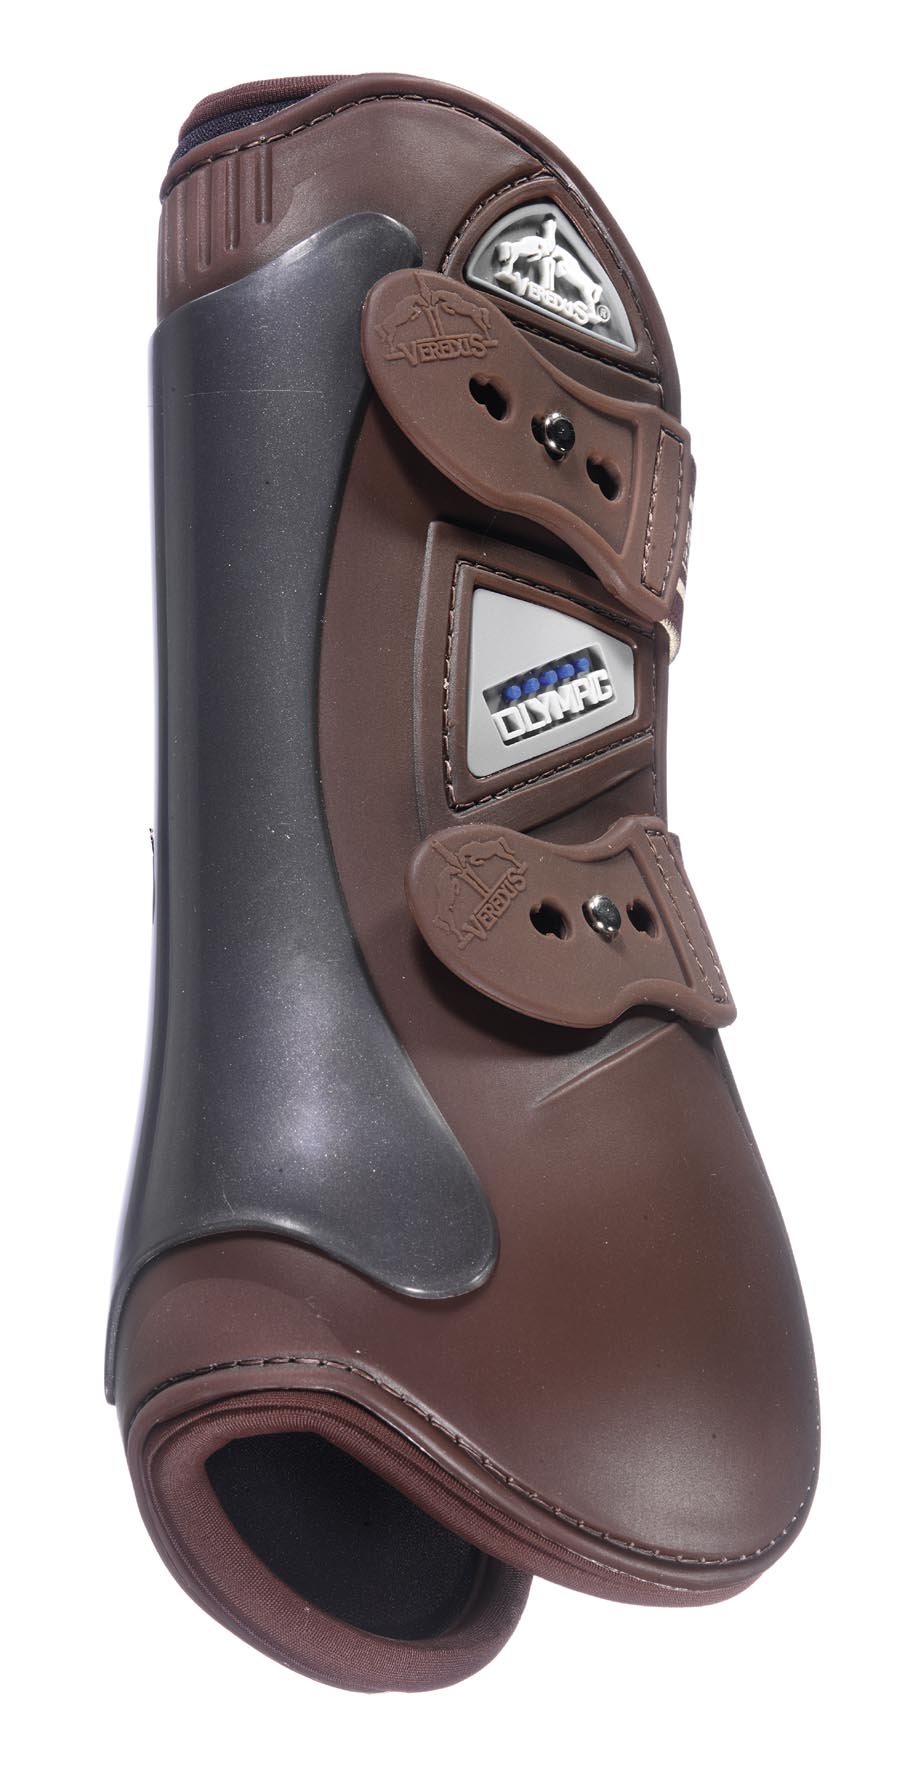 Veredus OLYMPIC Olympus Professional TENDON Showjumping Boots Black/Brown S/M/L 